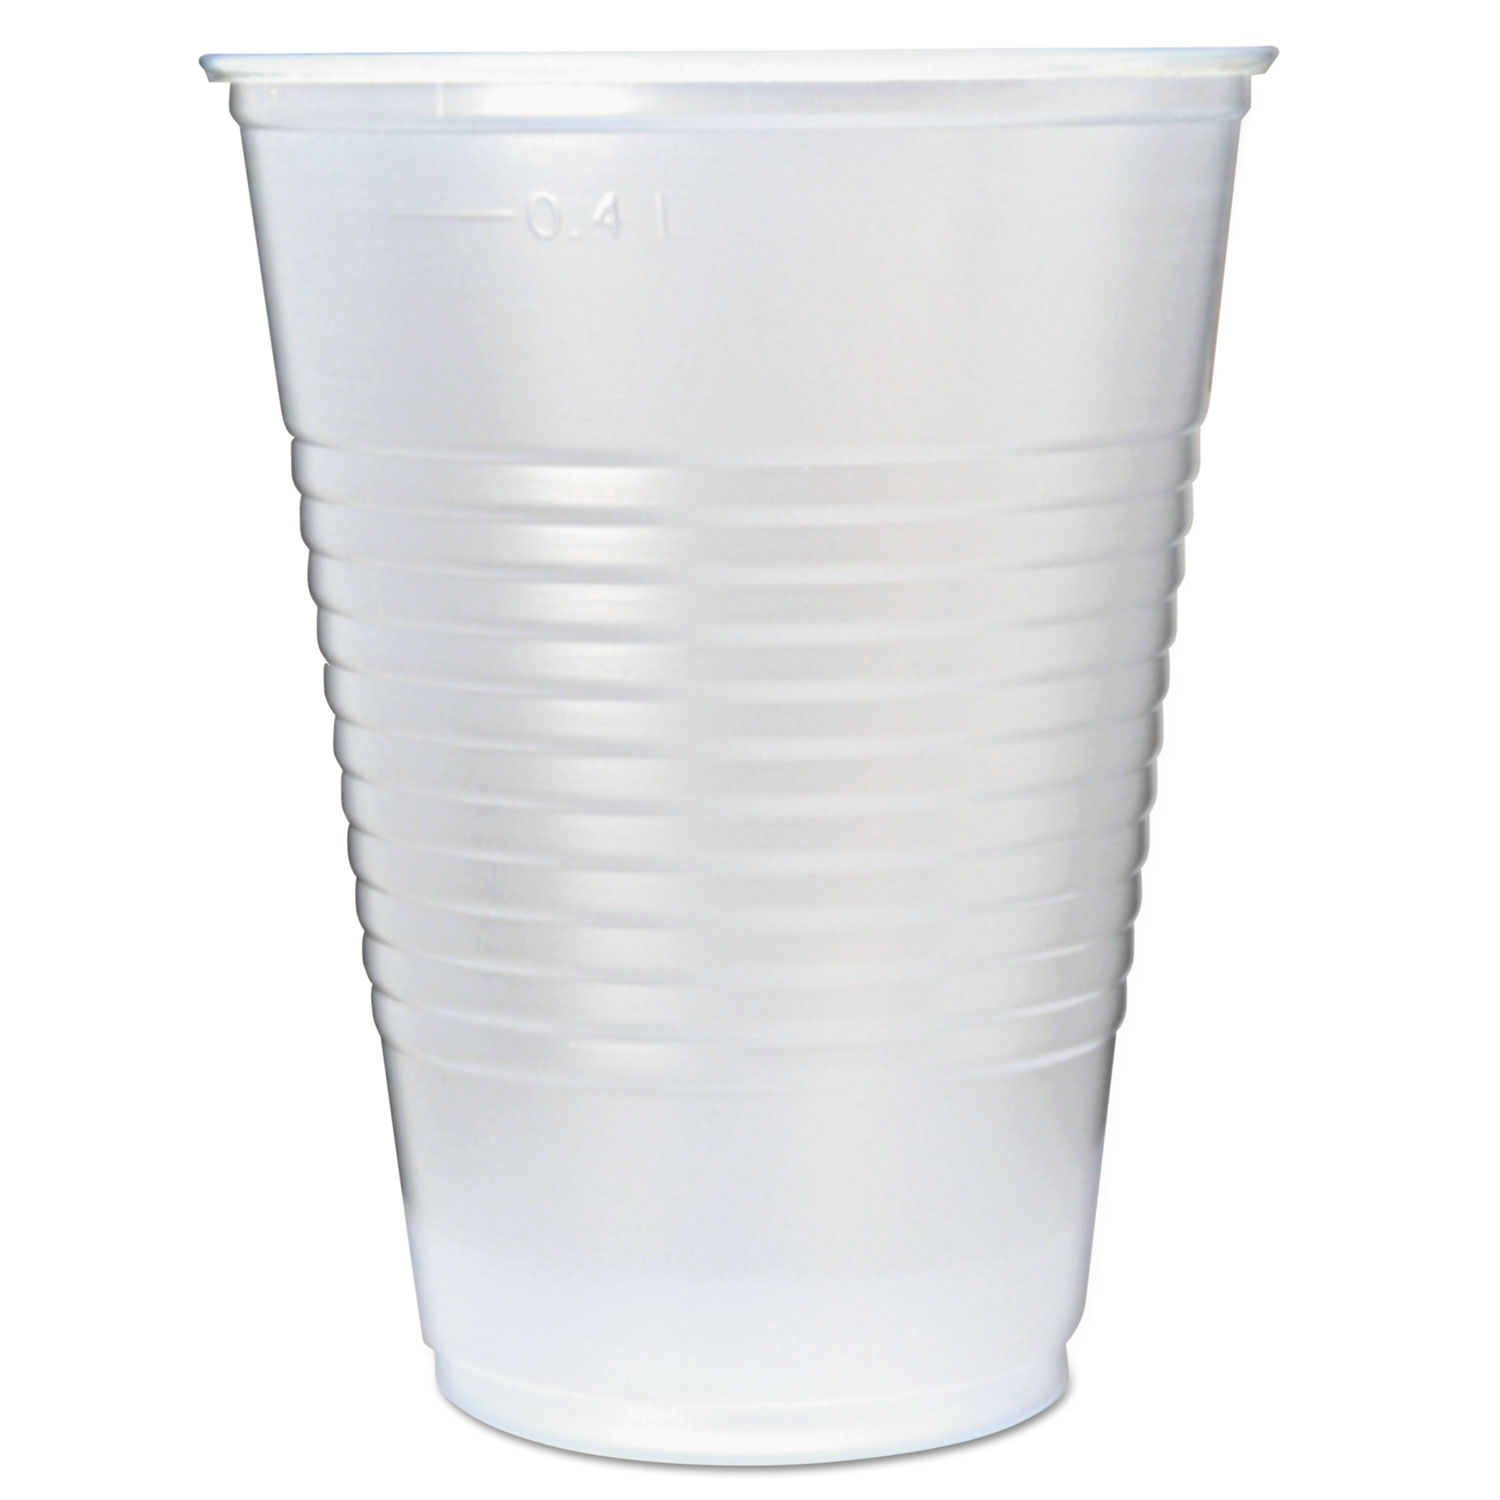  Fabri-Kal 9508032 RK Ribbed Cold Drink Cups, 16oz, Translucent, 50/Sleeve, 20 Sleeves/Carton (FABRK16) 